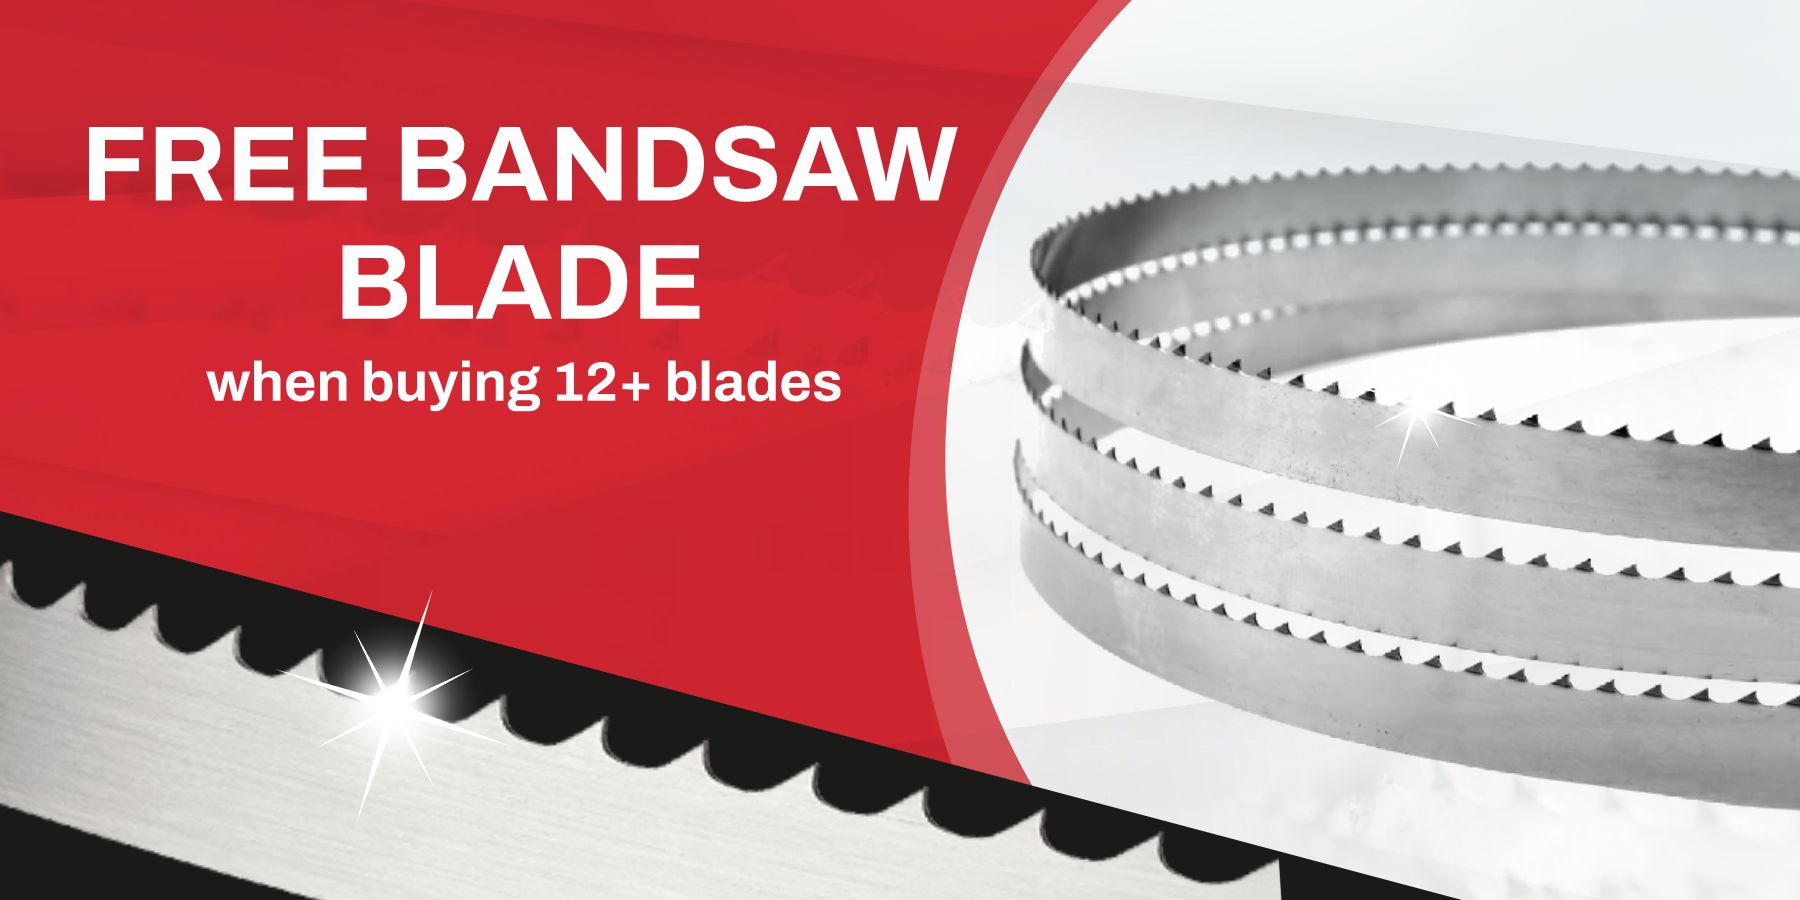 Free Bandsaw Blade when buying 12 or more Band saw Blades